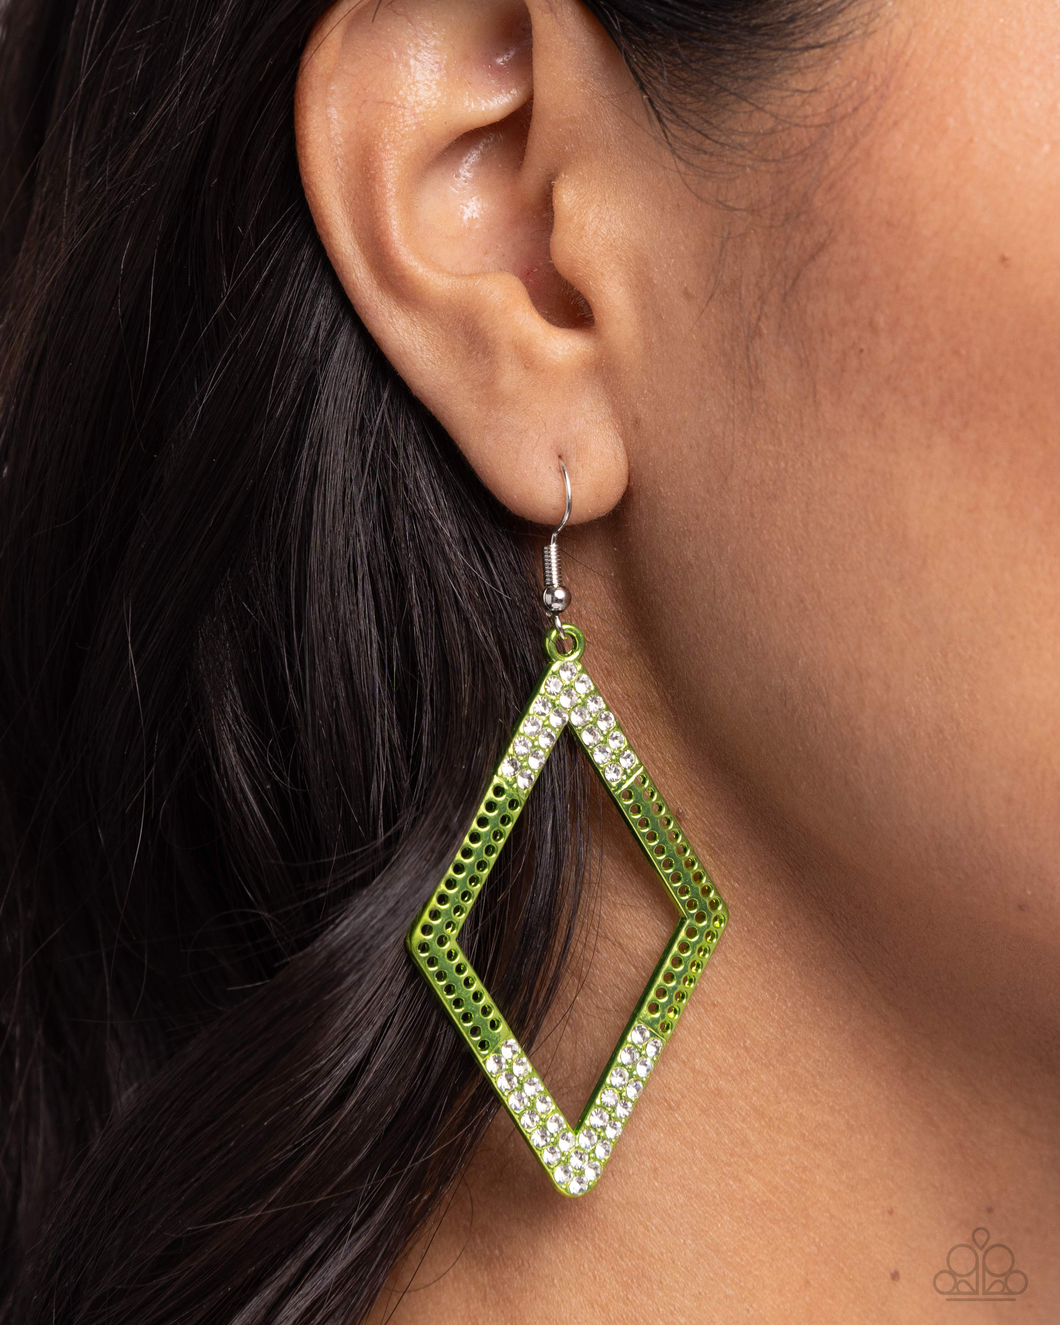 Paparazzi Eloquently Edgy - Green Earrings